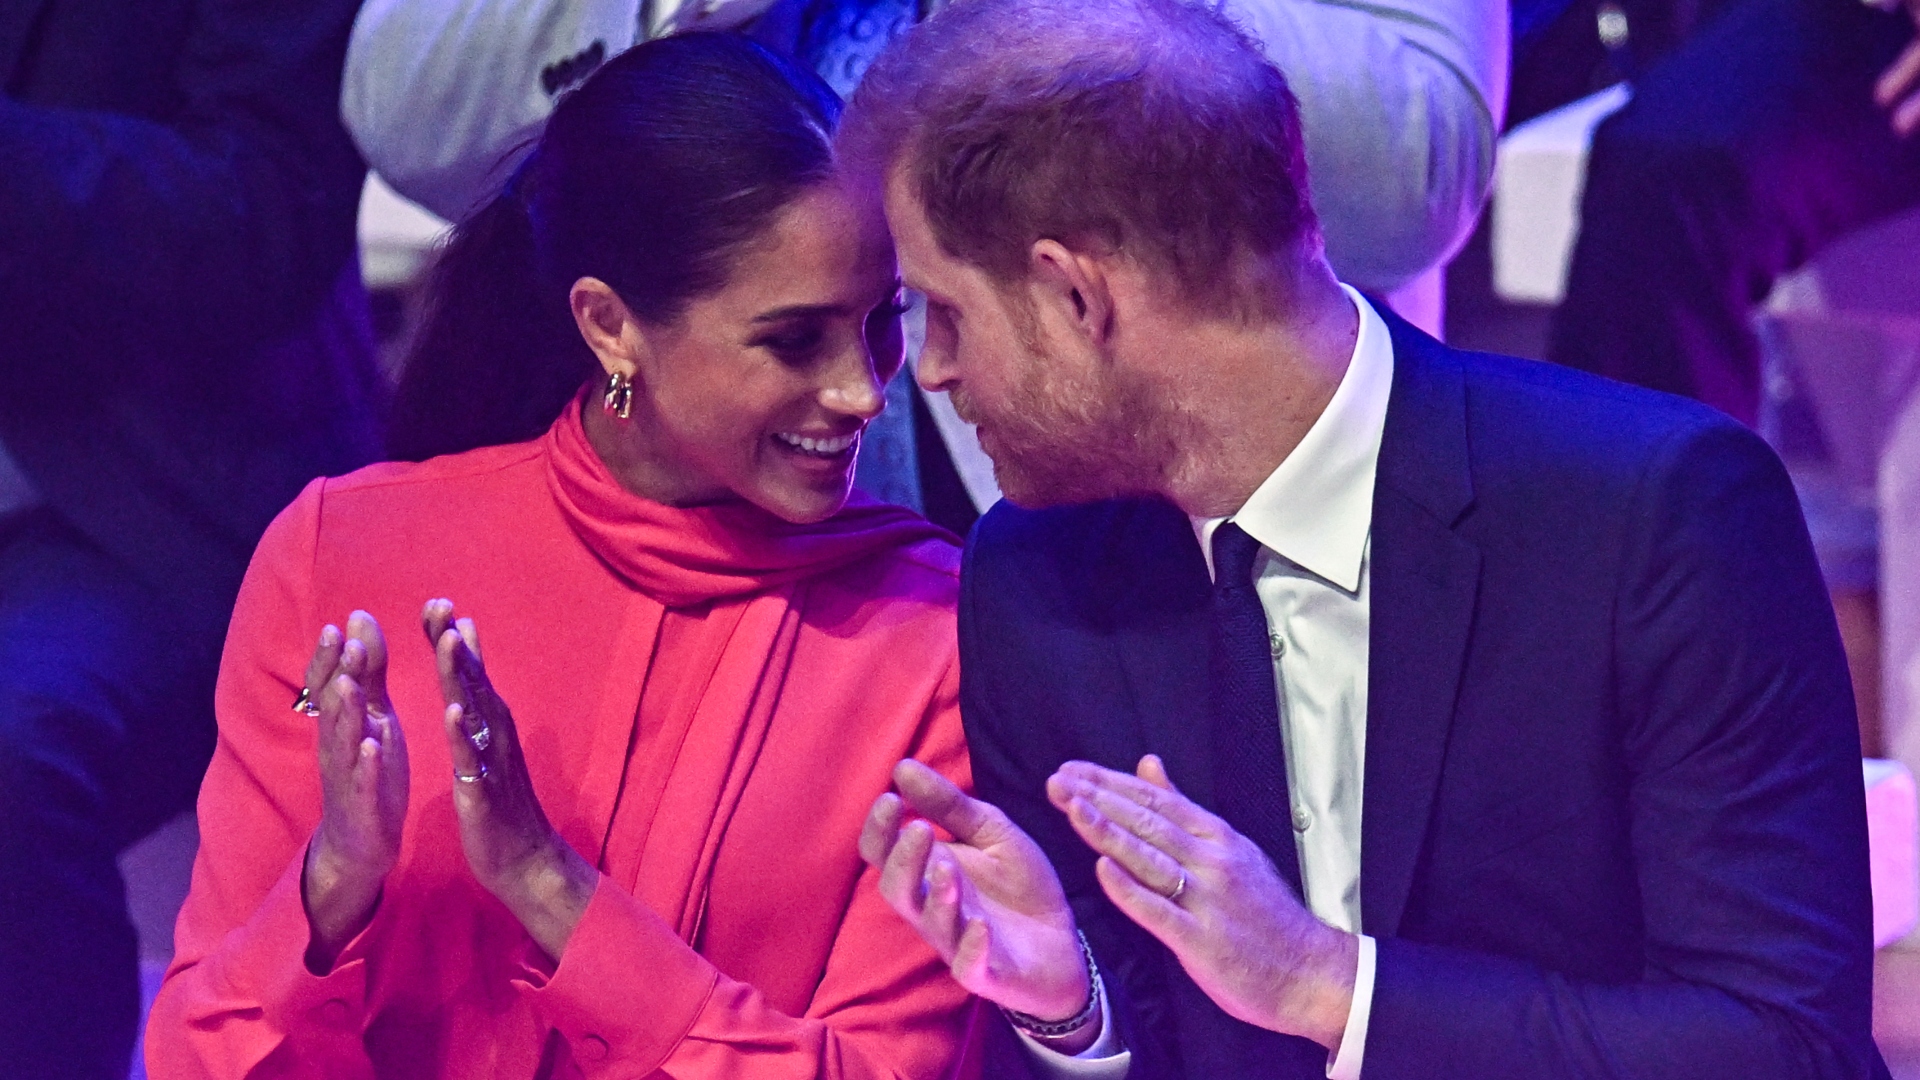 Britain's Meghan, Duchess of Sussex (L) and Britain's Prince Harry, Duke of Sussex, speak together as they applaud while attending the annual One Young World Summit at Bridgewater Hall in Manchester, north-west England on September 5, 2022. - The One Young World Summit is a global forum for young leaders, bringing together young people from over 190 countries around the world to come together to confront the biggest challenges facing humanity.